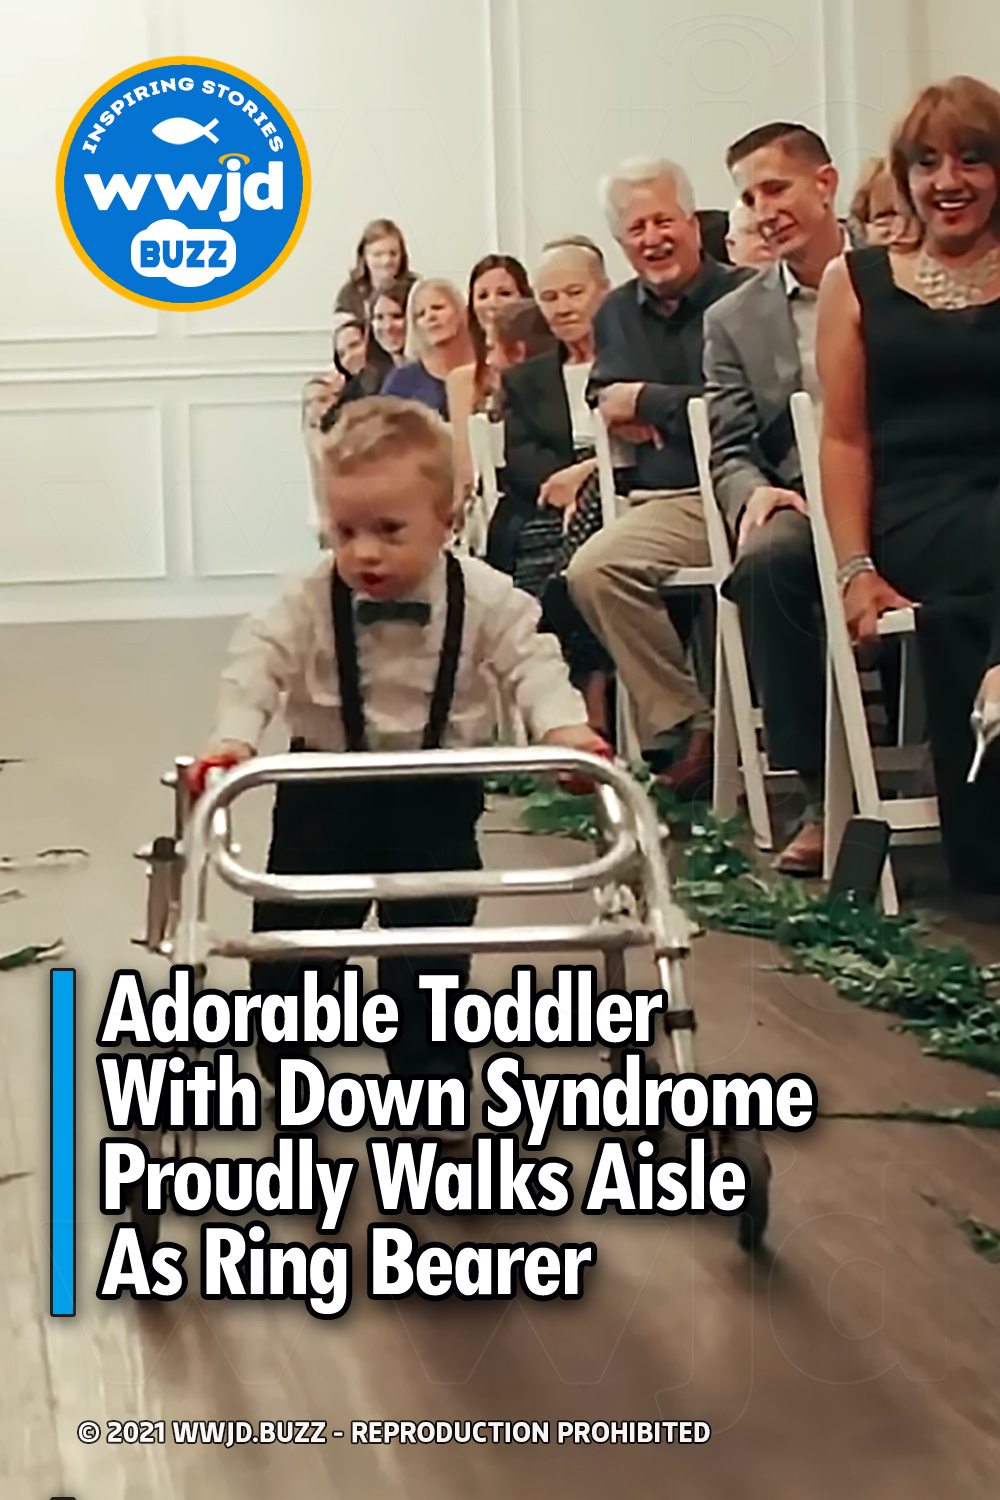 Adorable Toddler With Down Syndrome Proudly Walks Aisle As Ring Bearer